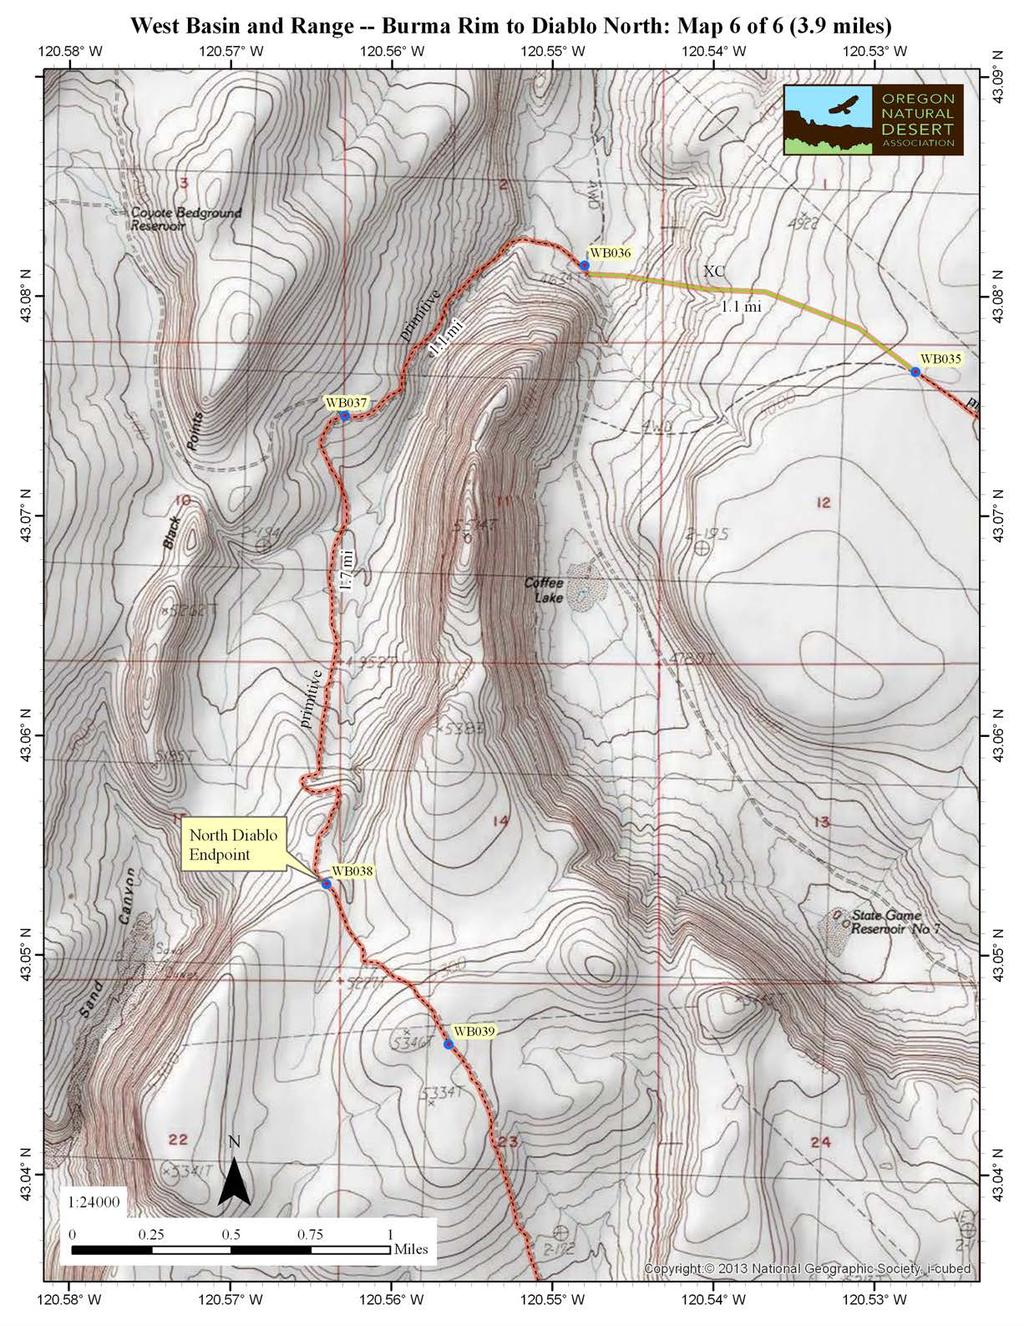 Section 5 Map 6 of 6: Burma Rim to Diablo Peak North road to Christmas Valley Hwy Suggested Water Cache #5 WB037: Black Points Area 12.